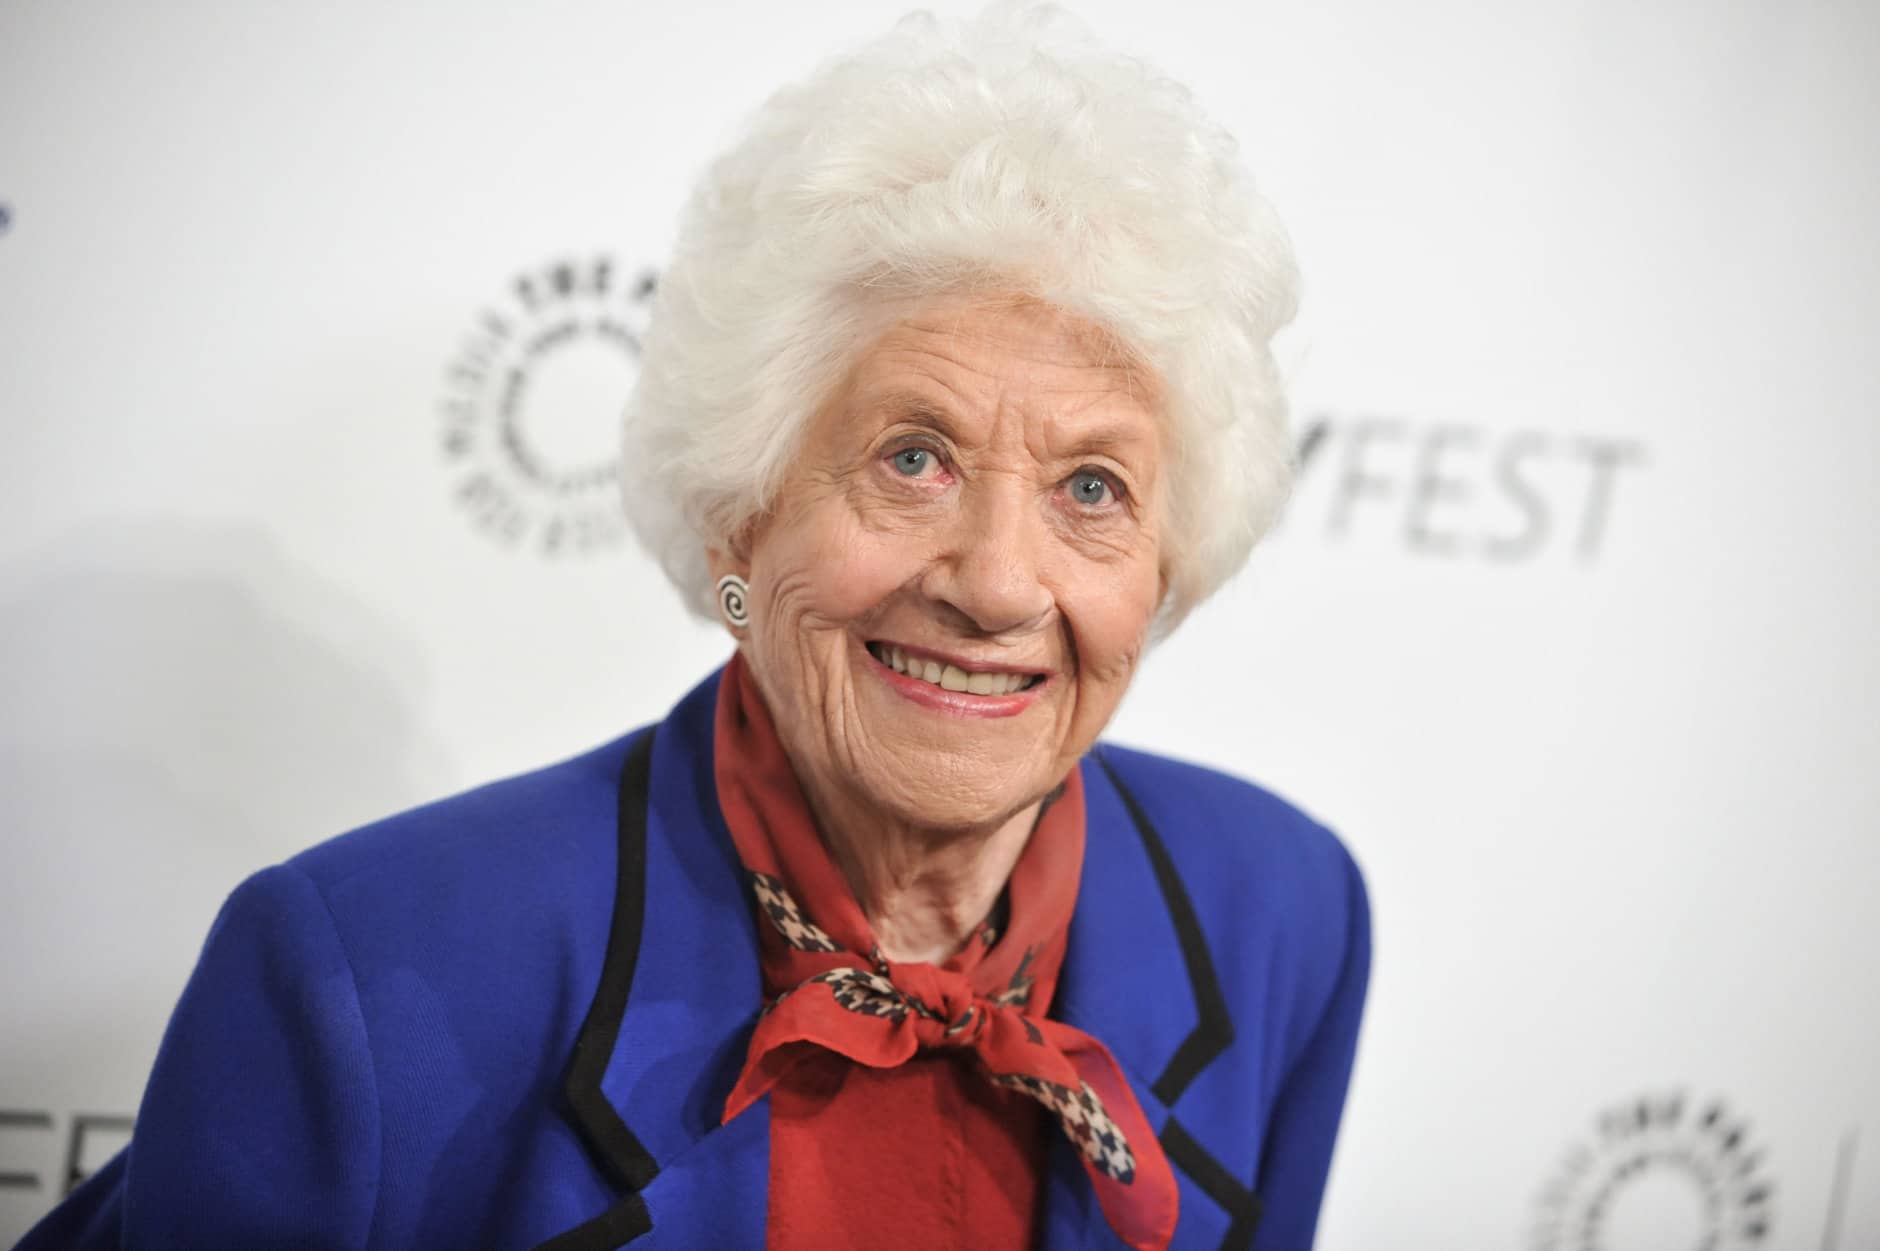 FILE - In this Sept. 15, 2014, file photo, Charlotte Rae arrives at the 2014 PALEYFEST Fall TV Previews - "The Facts Of Life" Reunion in Beverly Hills, Calif. Rae recounts in her new autobiography, her own life bore little resemblance to the sitcom-grade serenity of her "Facts of Life" character, Edna Garrett, instead marked by challenges that included son Andys autism and her husband's late-in-life disclosure that he was bisexual and wanted an open marriage. (Photo by Richard Shotwell/Invision/AP, FILE)